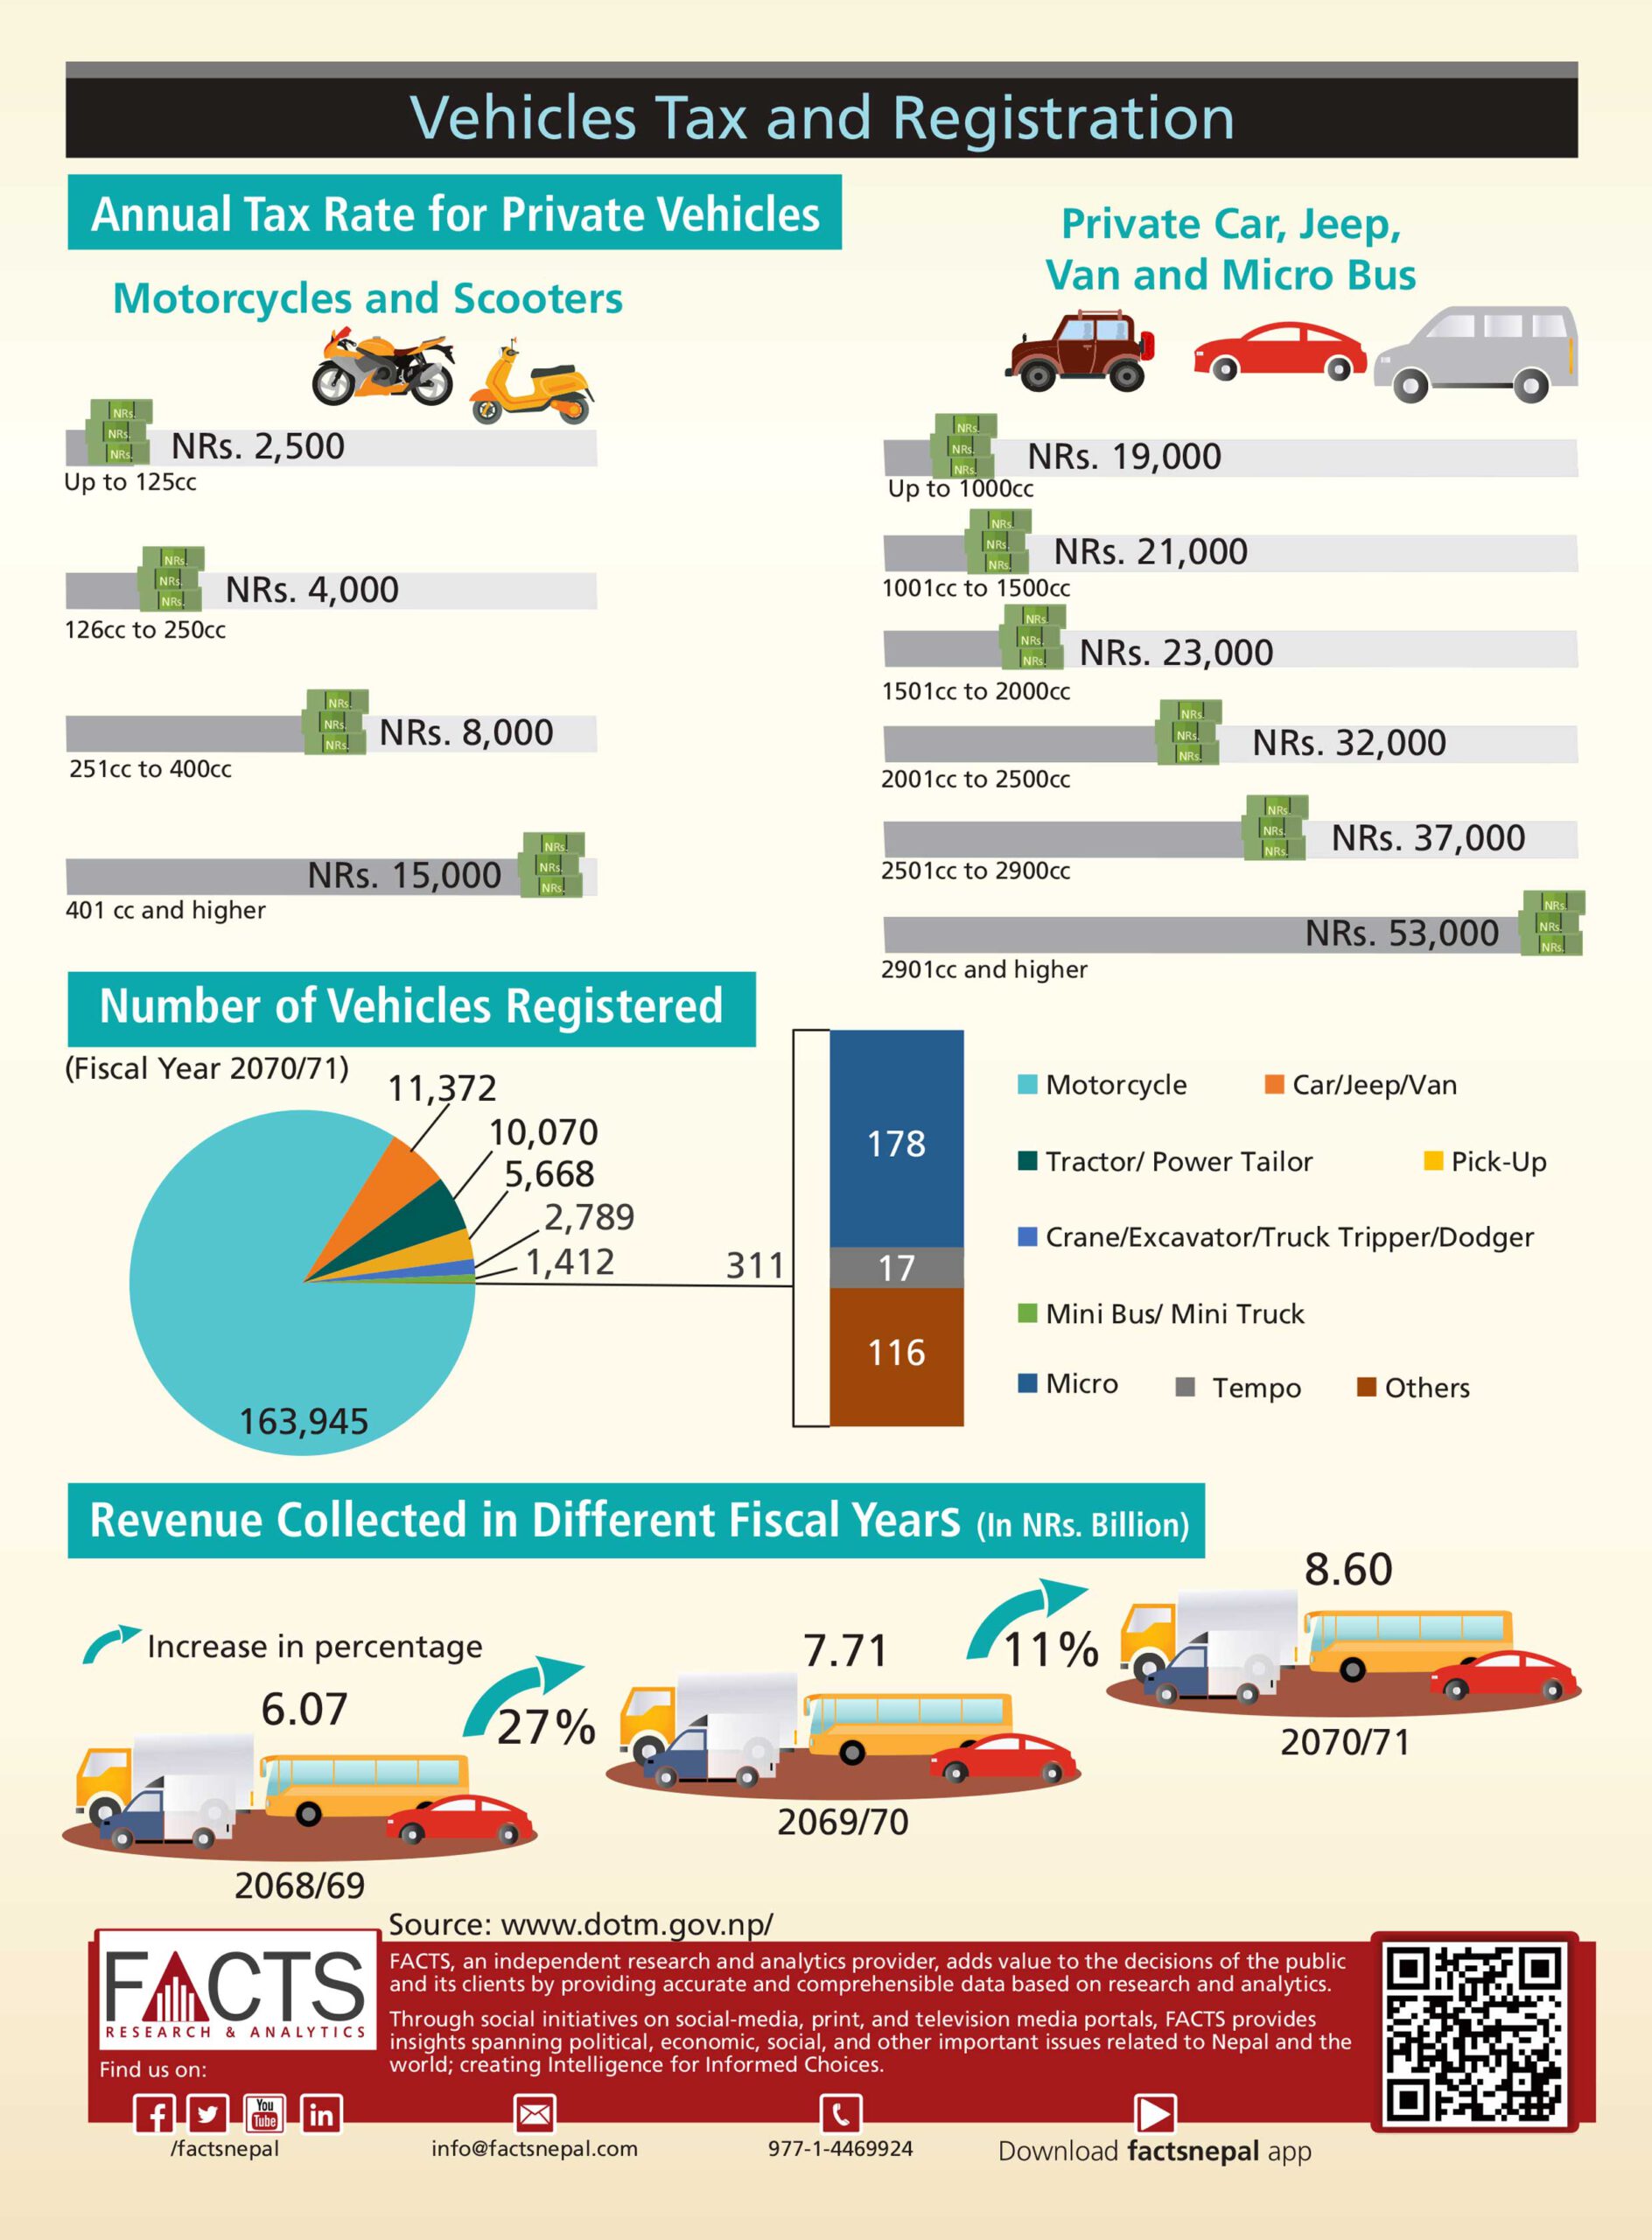 Vehicles Tax and Registration